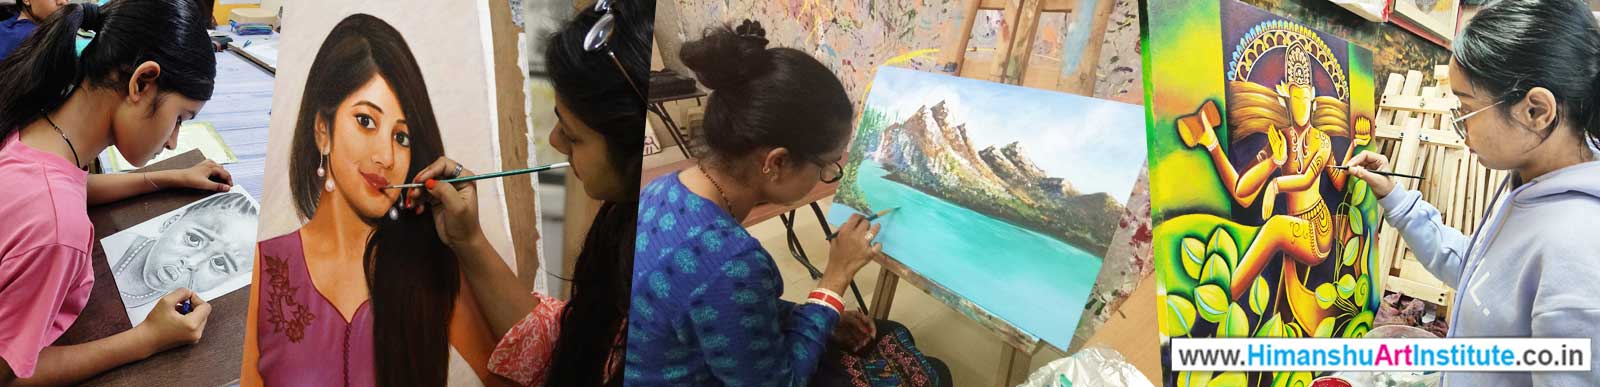 Online Diploma Course in Drawing and Painting, Drawing & Painting Classes in Delhi, Best Painting Institute in India